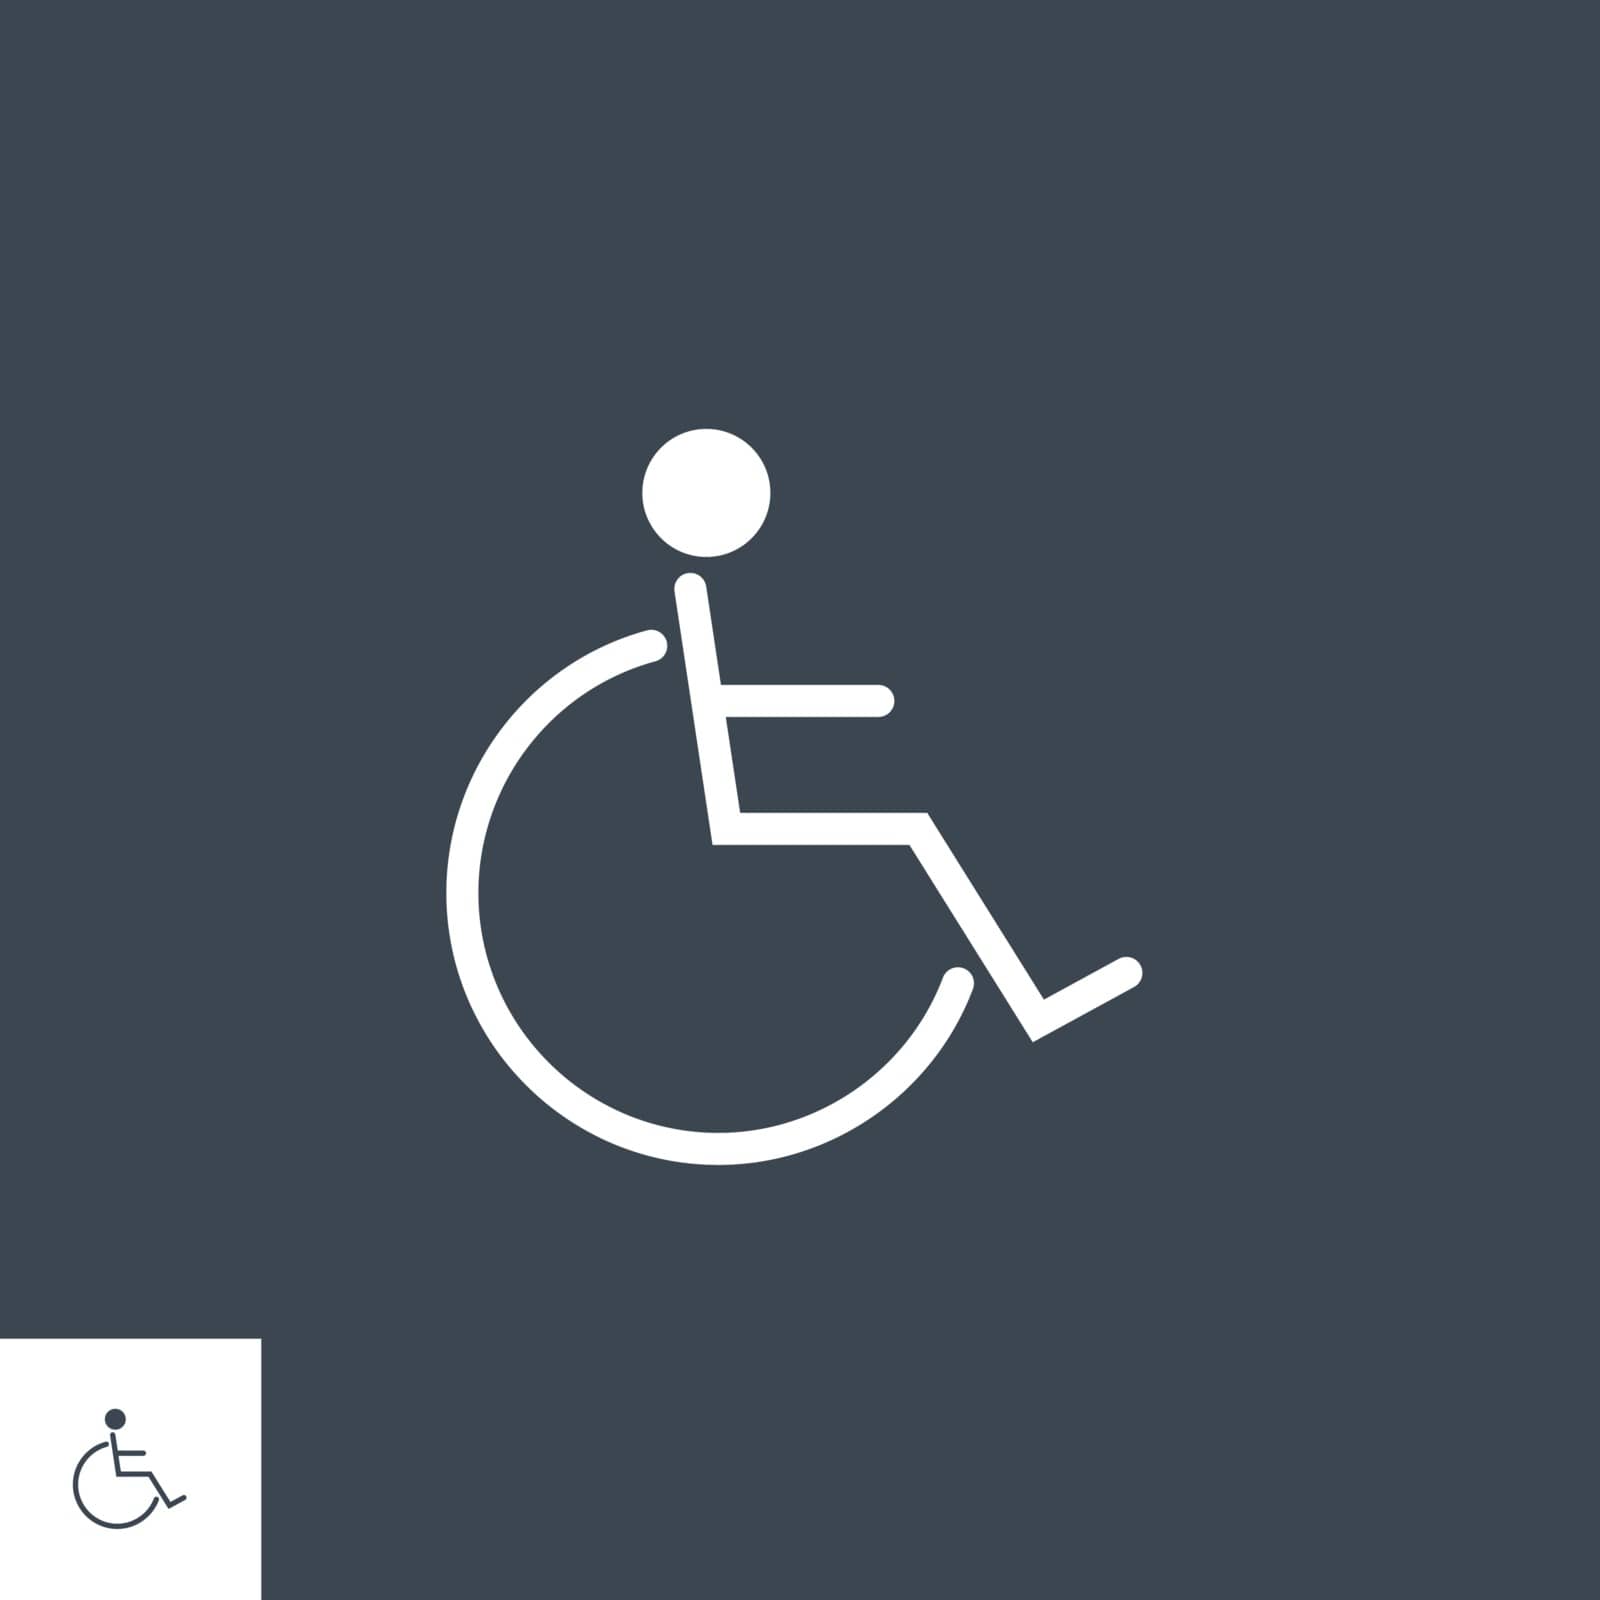 Disabled related vector glyph icon. Isolated on black background. Vector illustration.